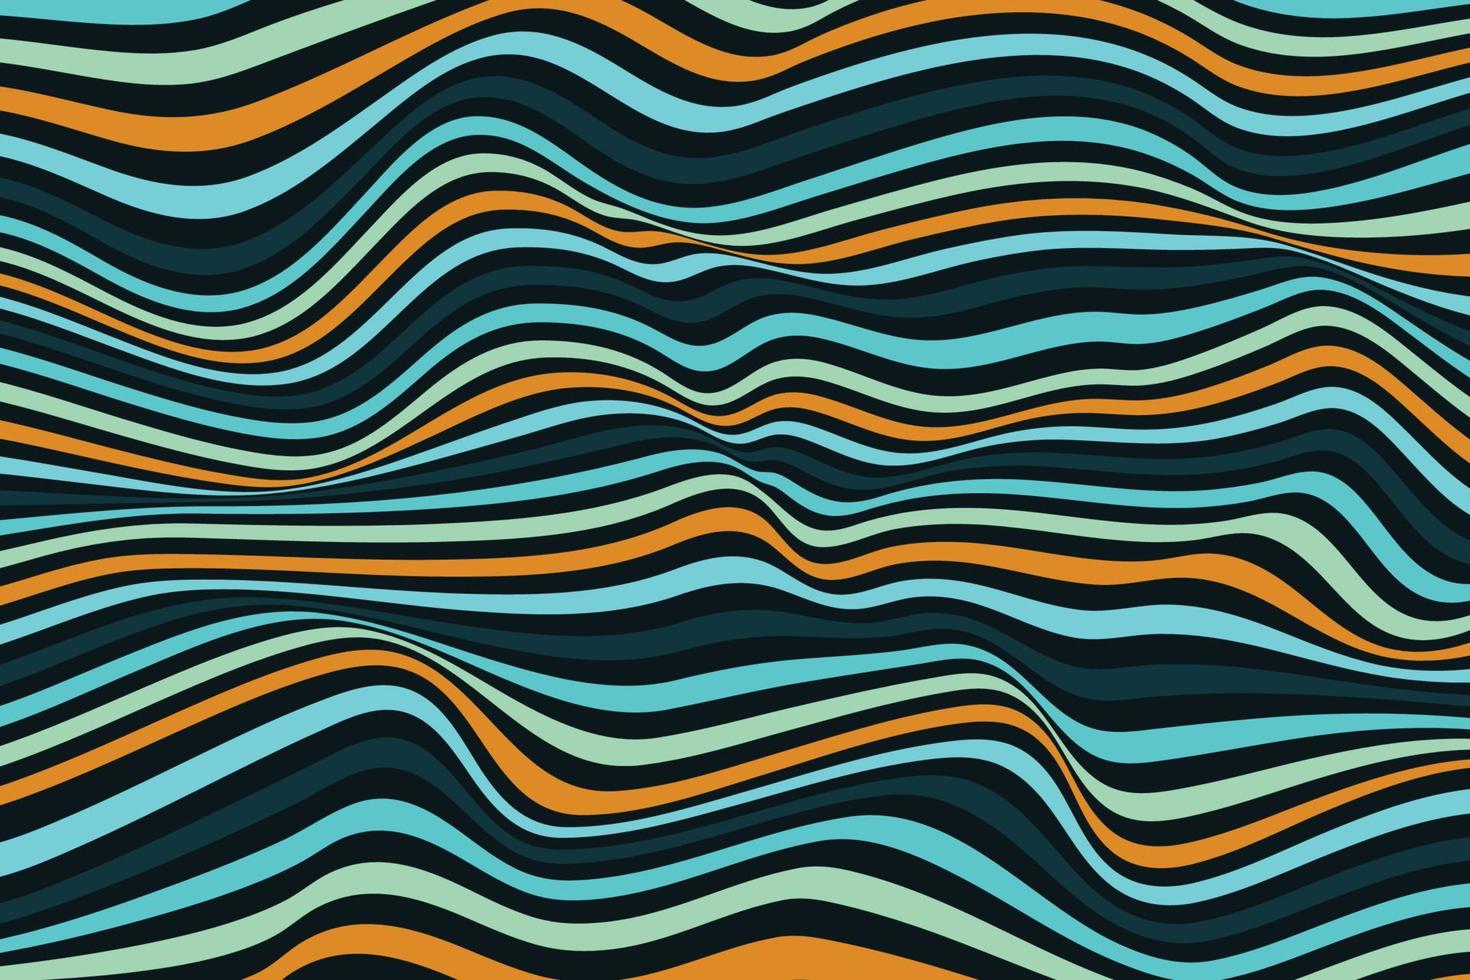 Colorful line wave background. Stylish smooth dynamic striped surface. Abstract smooth swirl pattern texture vector